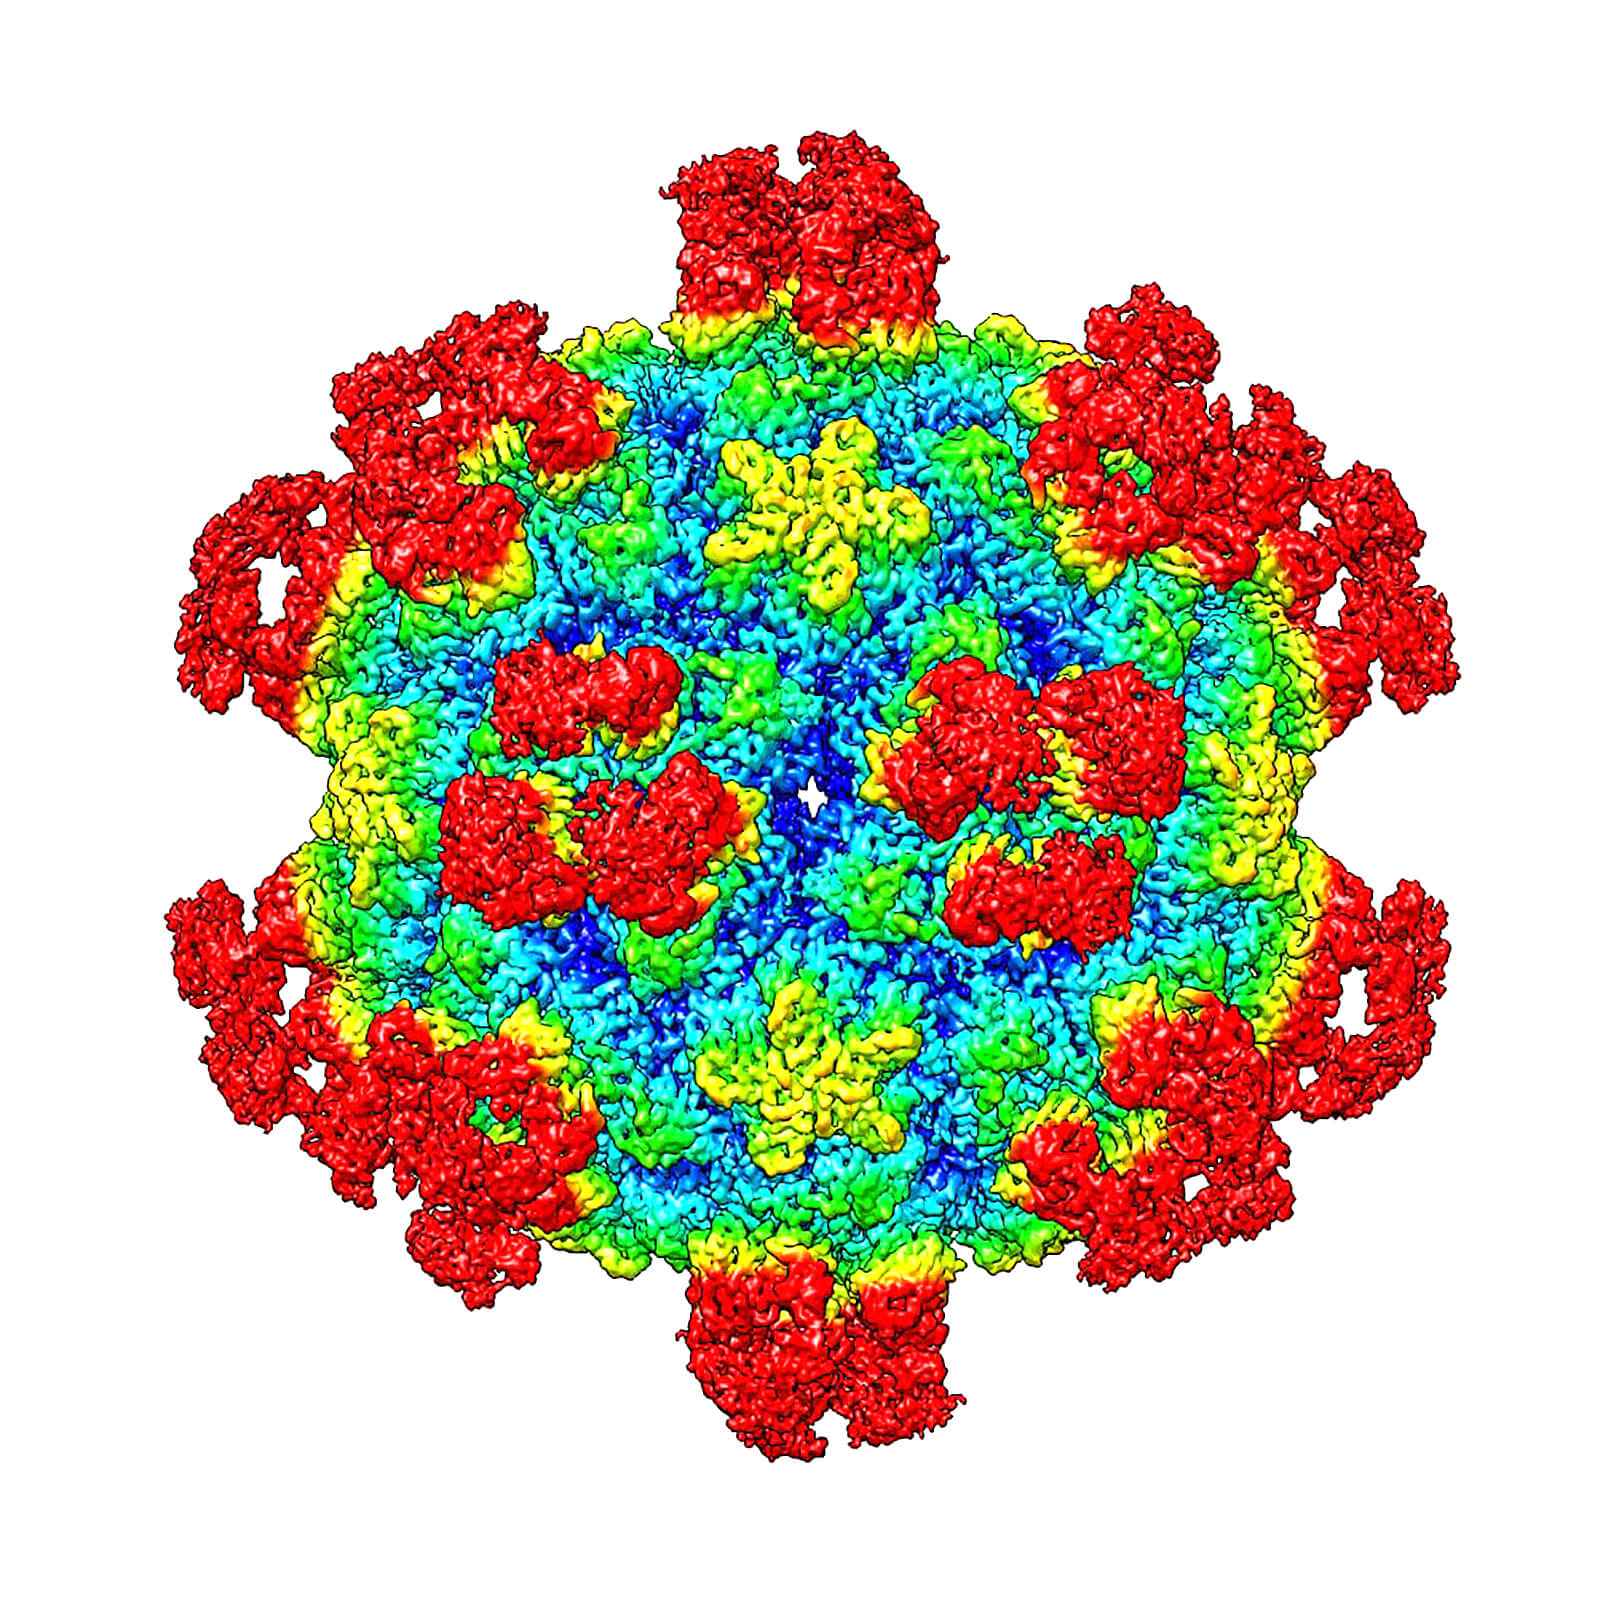 New mechanism to destroy viruses could lead to future therapies - Purdue University News1600 x 1600